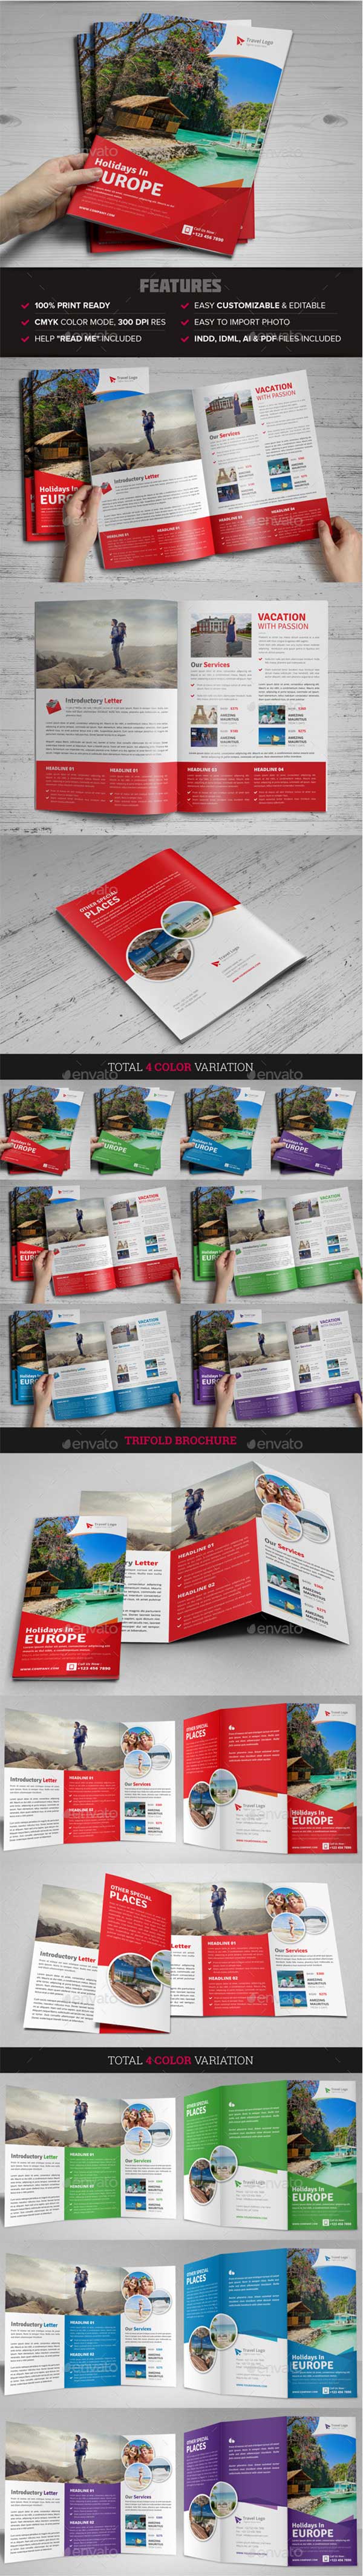 holiday-travel-agency-bifold-and-trifold-brochure